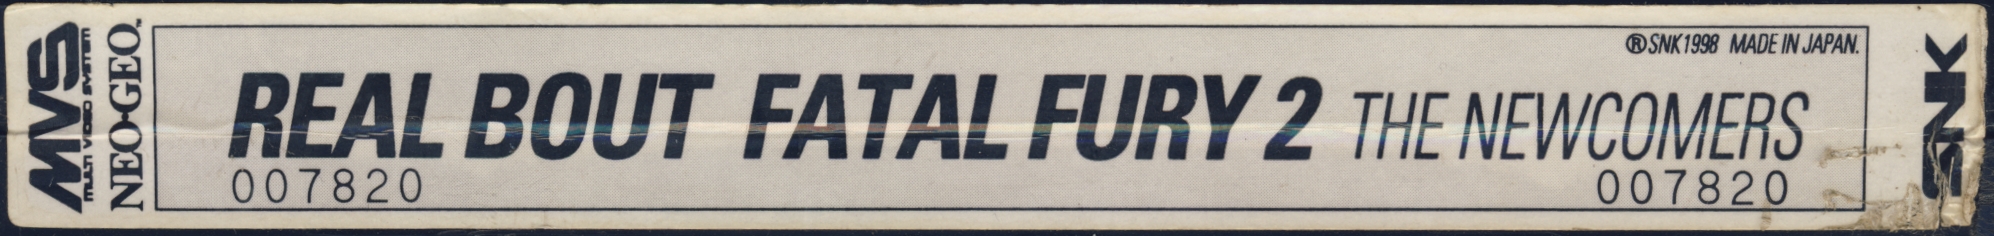 Real bout fatal fury 2 us label.jpg